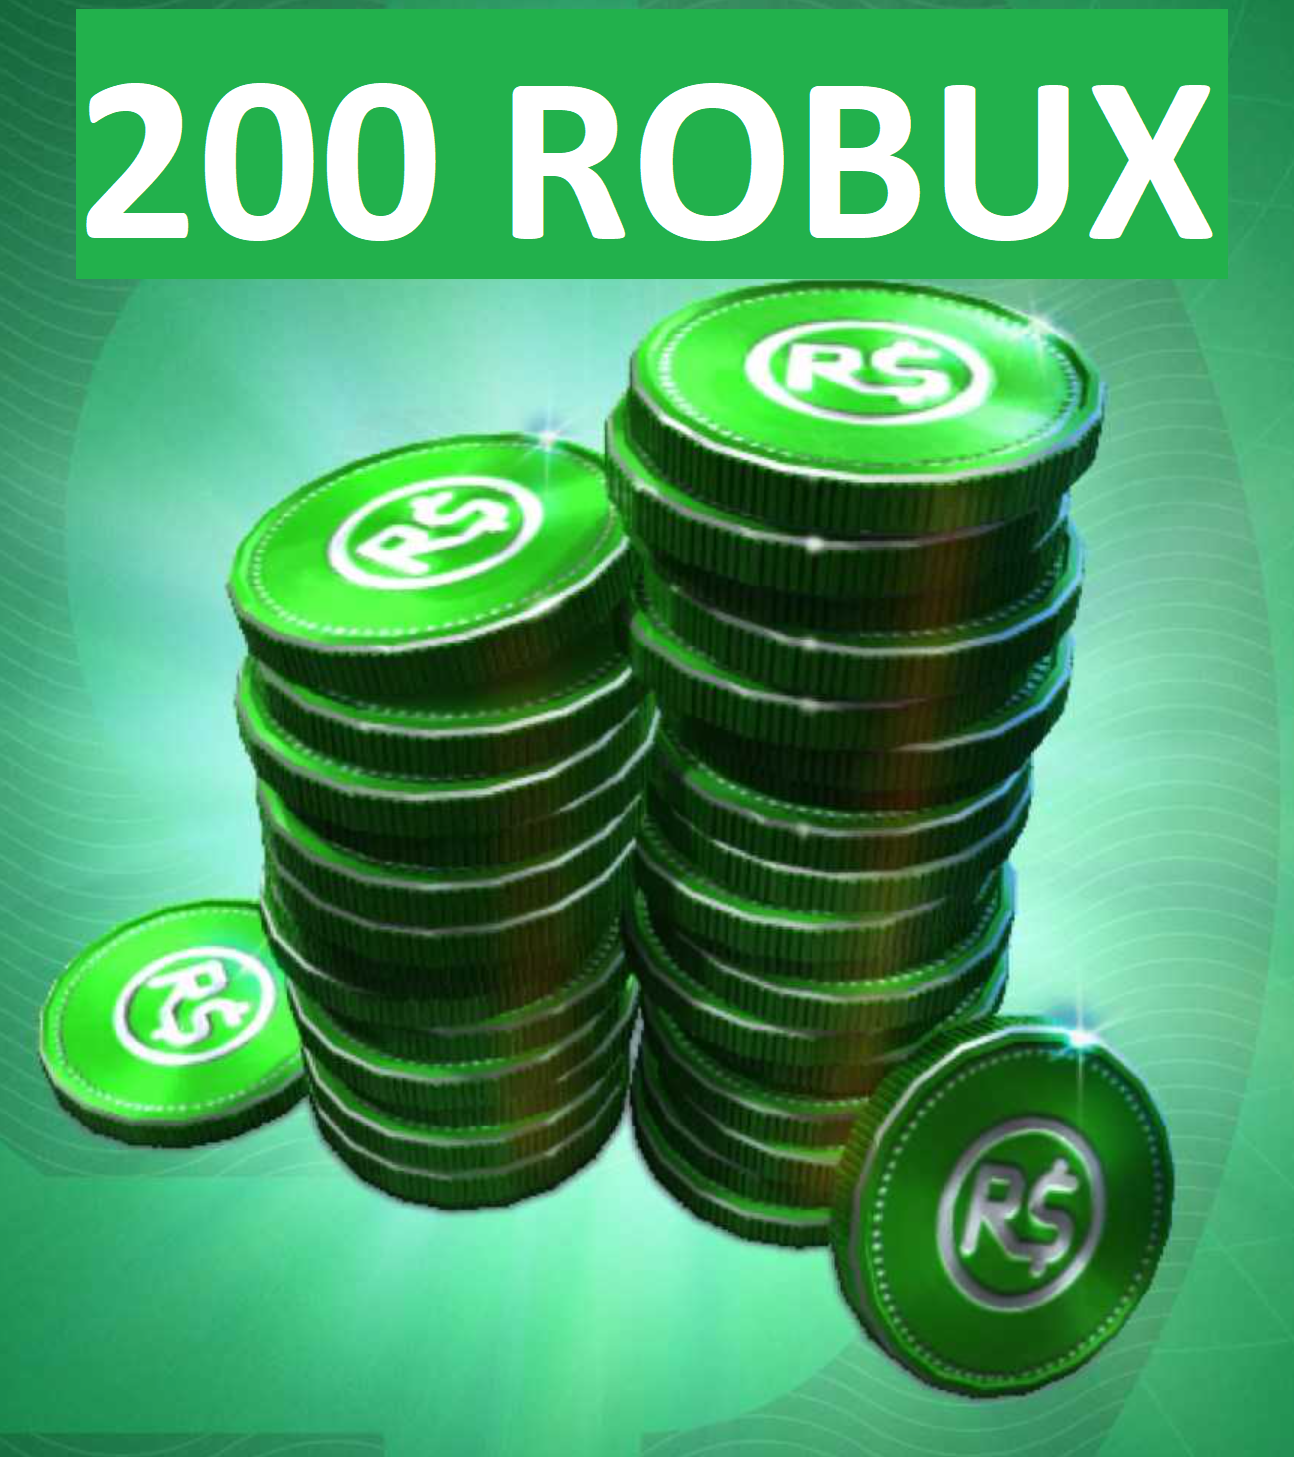 Buy Roblox Gift Card 200 Robux Global And Download - 200 robux